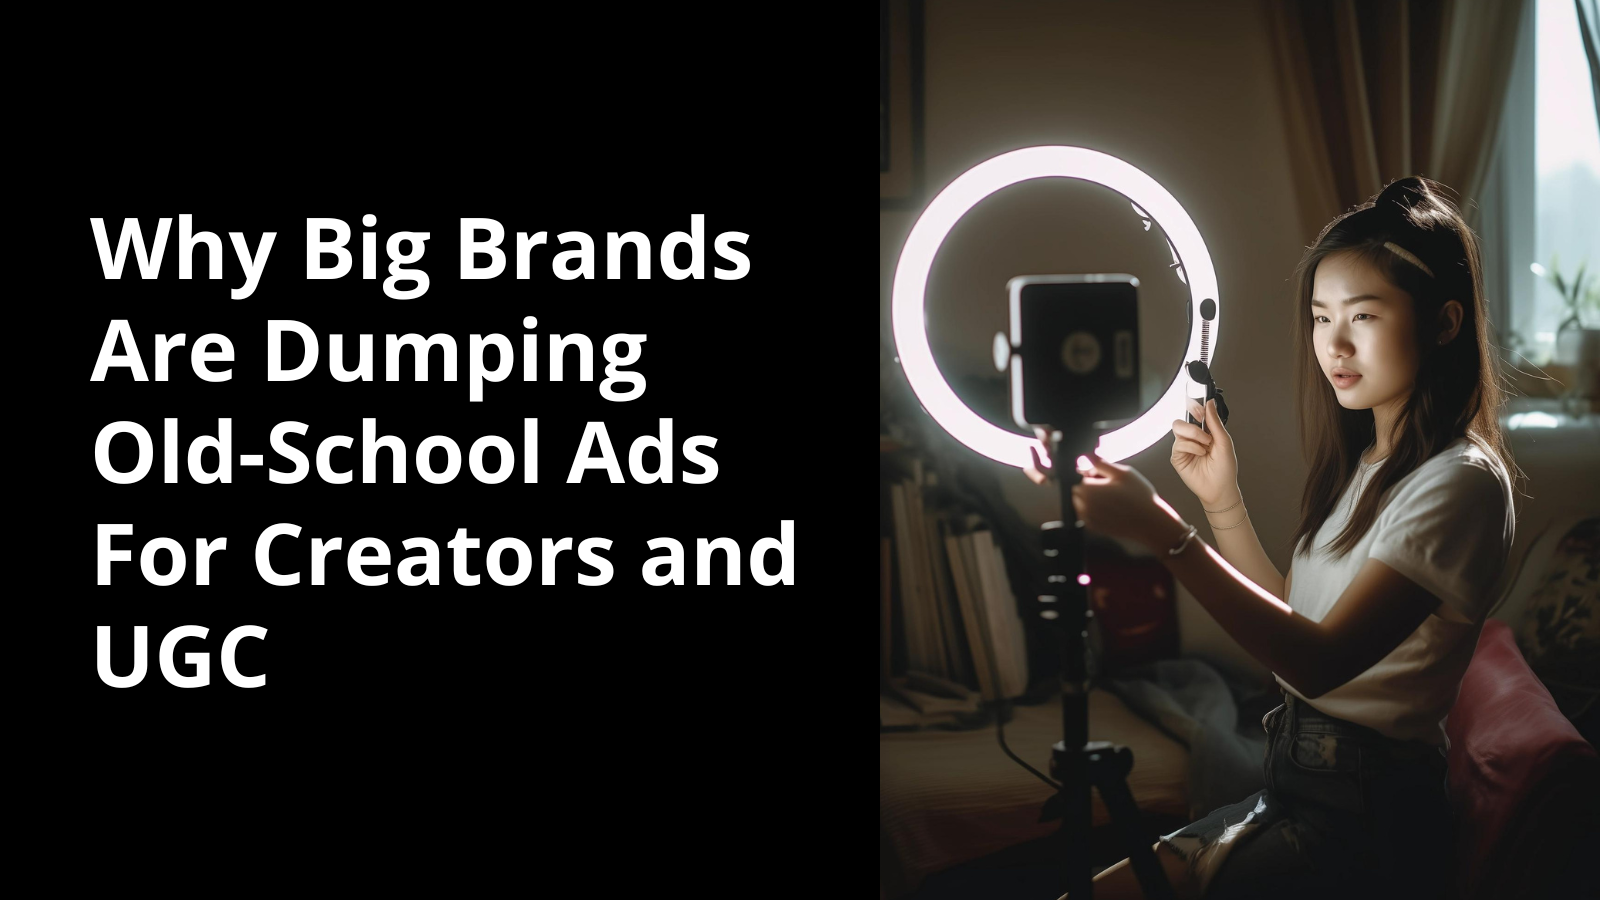 Why Big Brands Are Dumping Old-School Ads For Creators and User-Generated Content